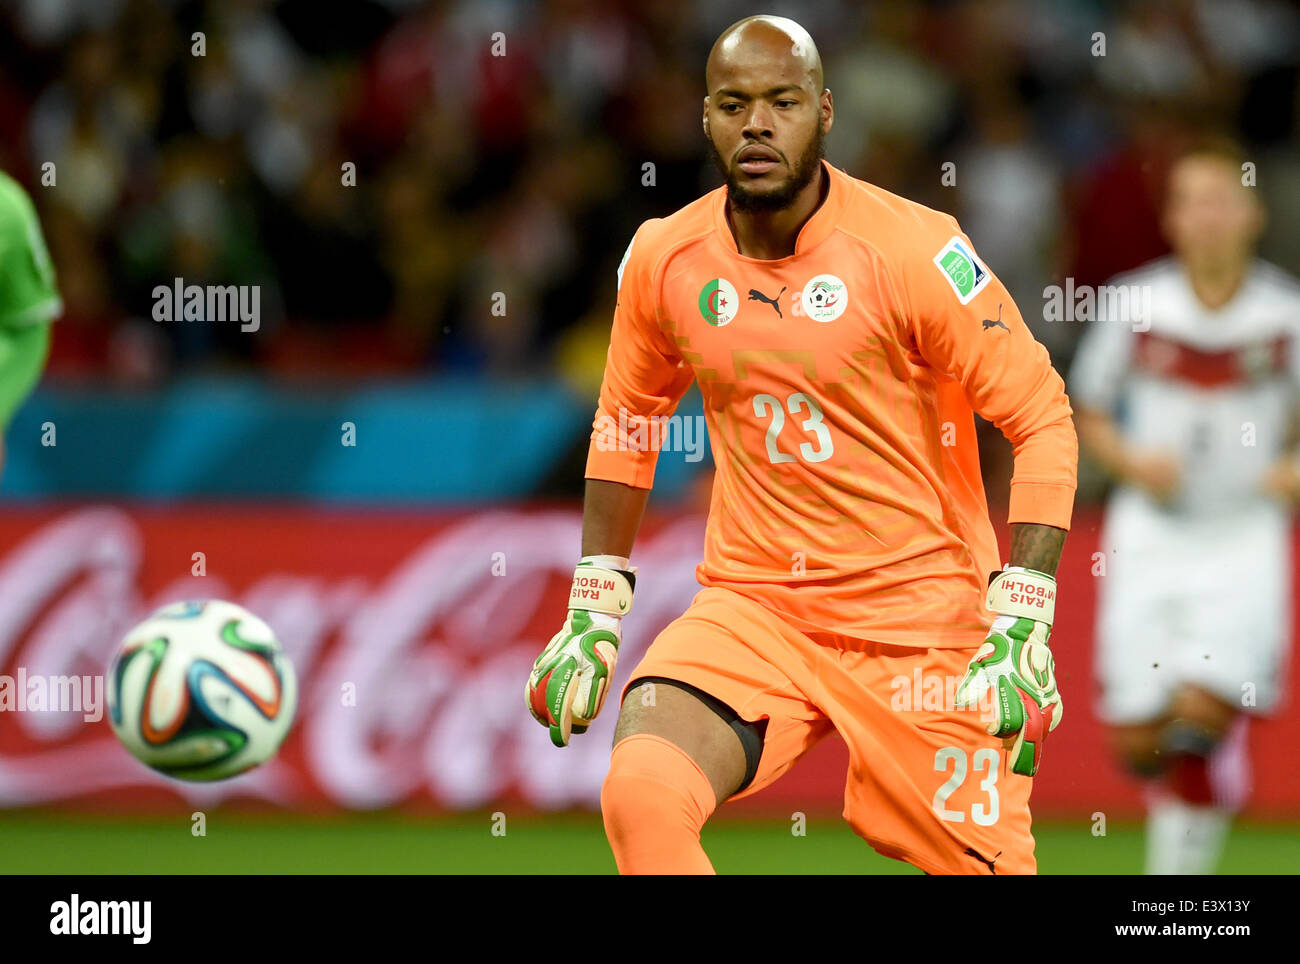 Porto Alegre, Brazil. 30th June, 2014. Goalkeeper Rais Mbolhi of Algeria in action during the FIFA World Cup 2014 round of 16 soccer match between Germany and Algeria at the Estadio Beira-Rio in Porto Alegre, Brazil, 30 June 2014. Photo: Andreas Gebert/dpa/Alamy Live News Stock Photo